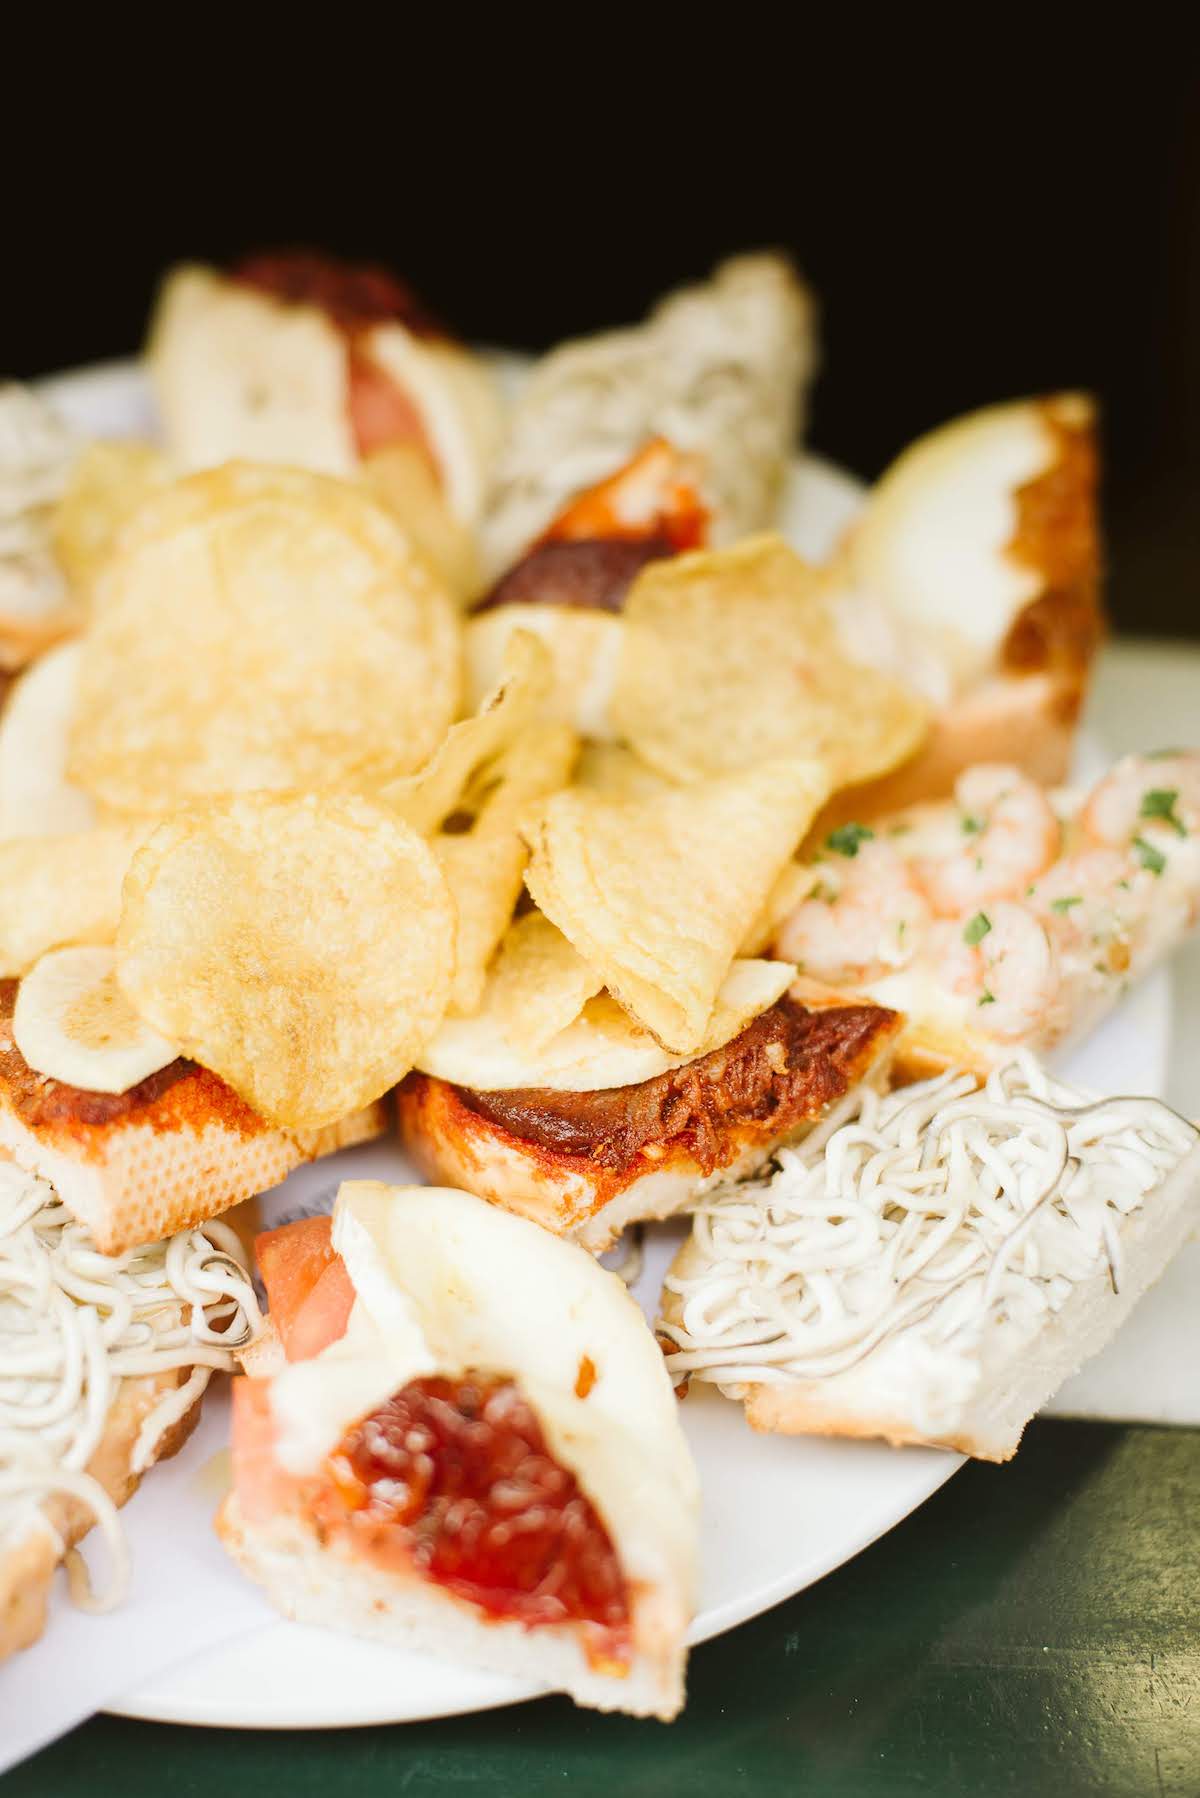 Plate of small open faced sandwiches with various toppings, with a pile of potato chips in the middle.